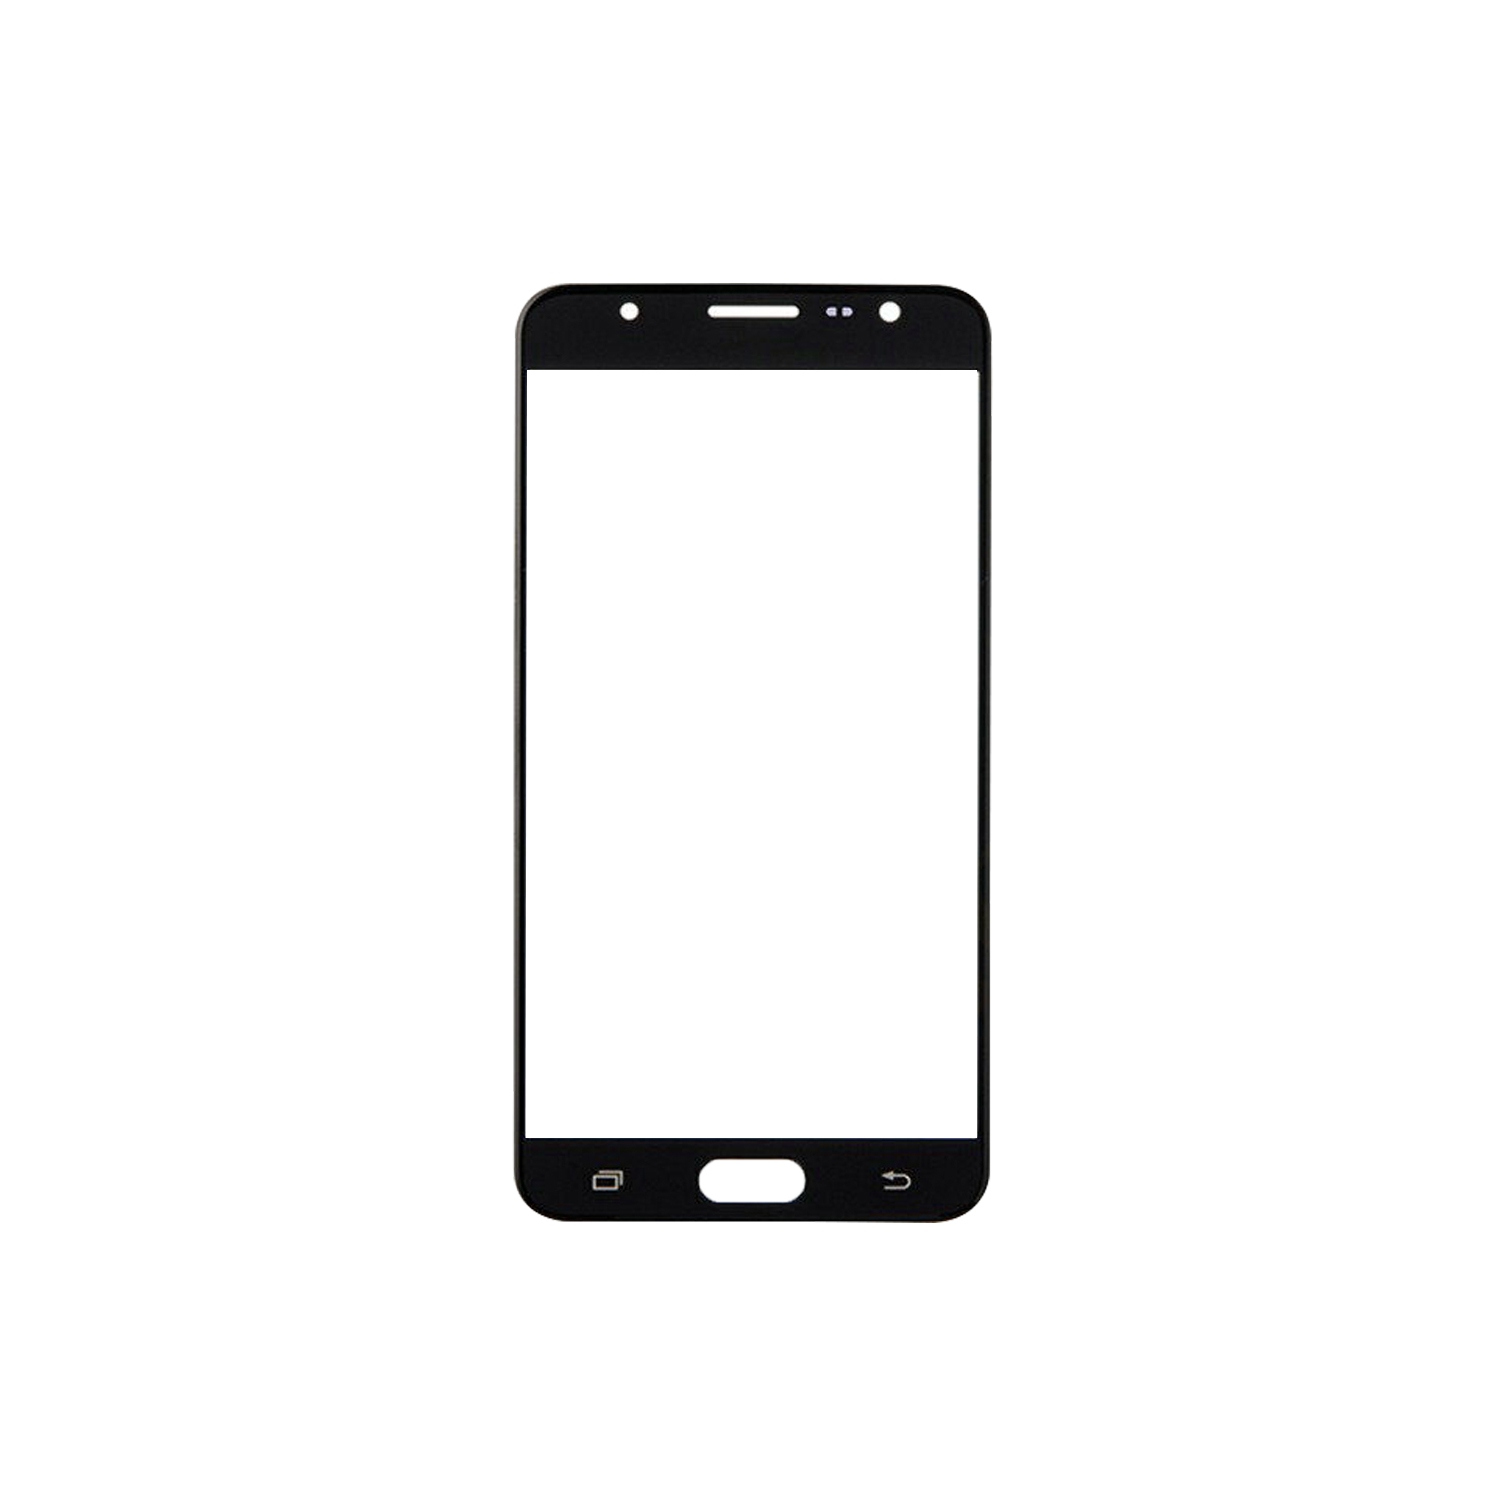 Replacement Front Top Glass Outer Screen Glass Lens For Samsung Galaxy J7 Prime - Black